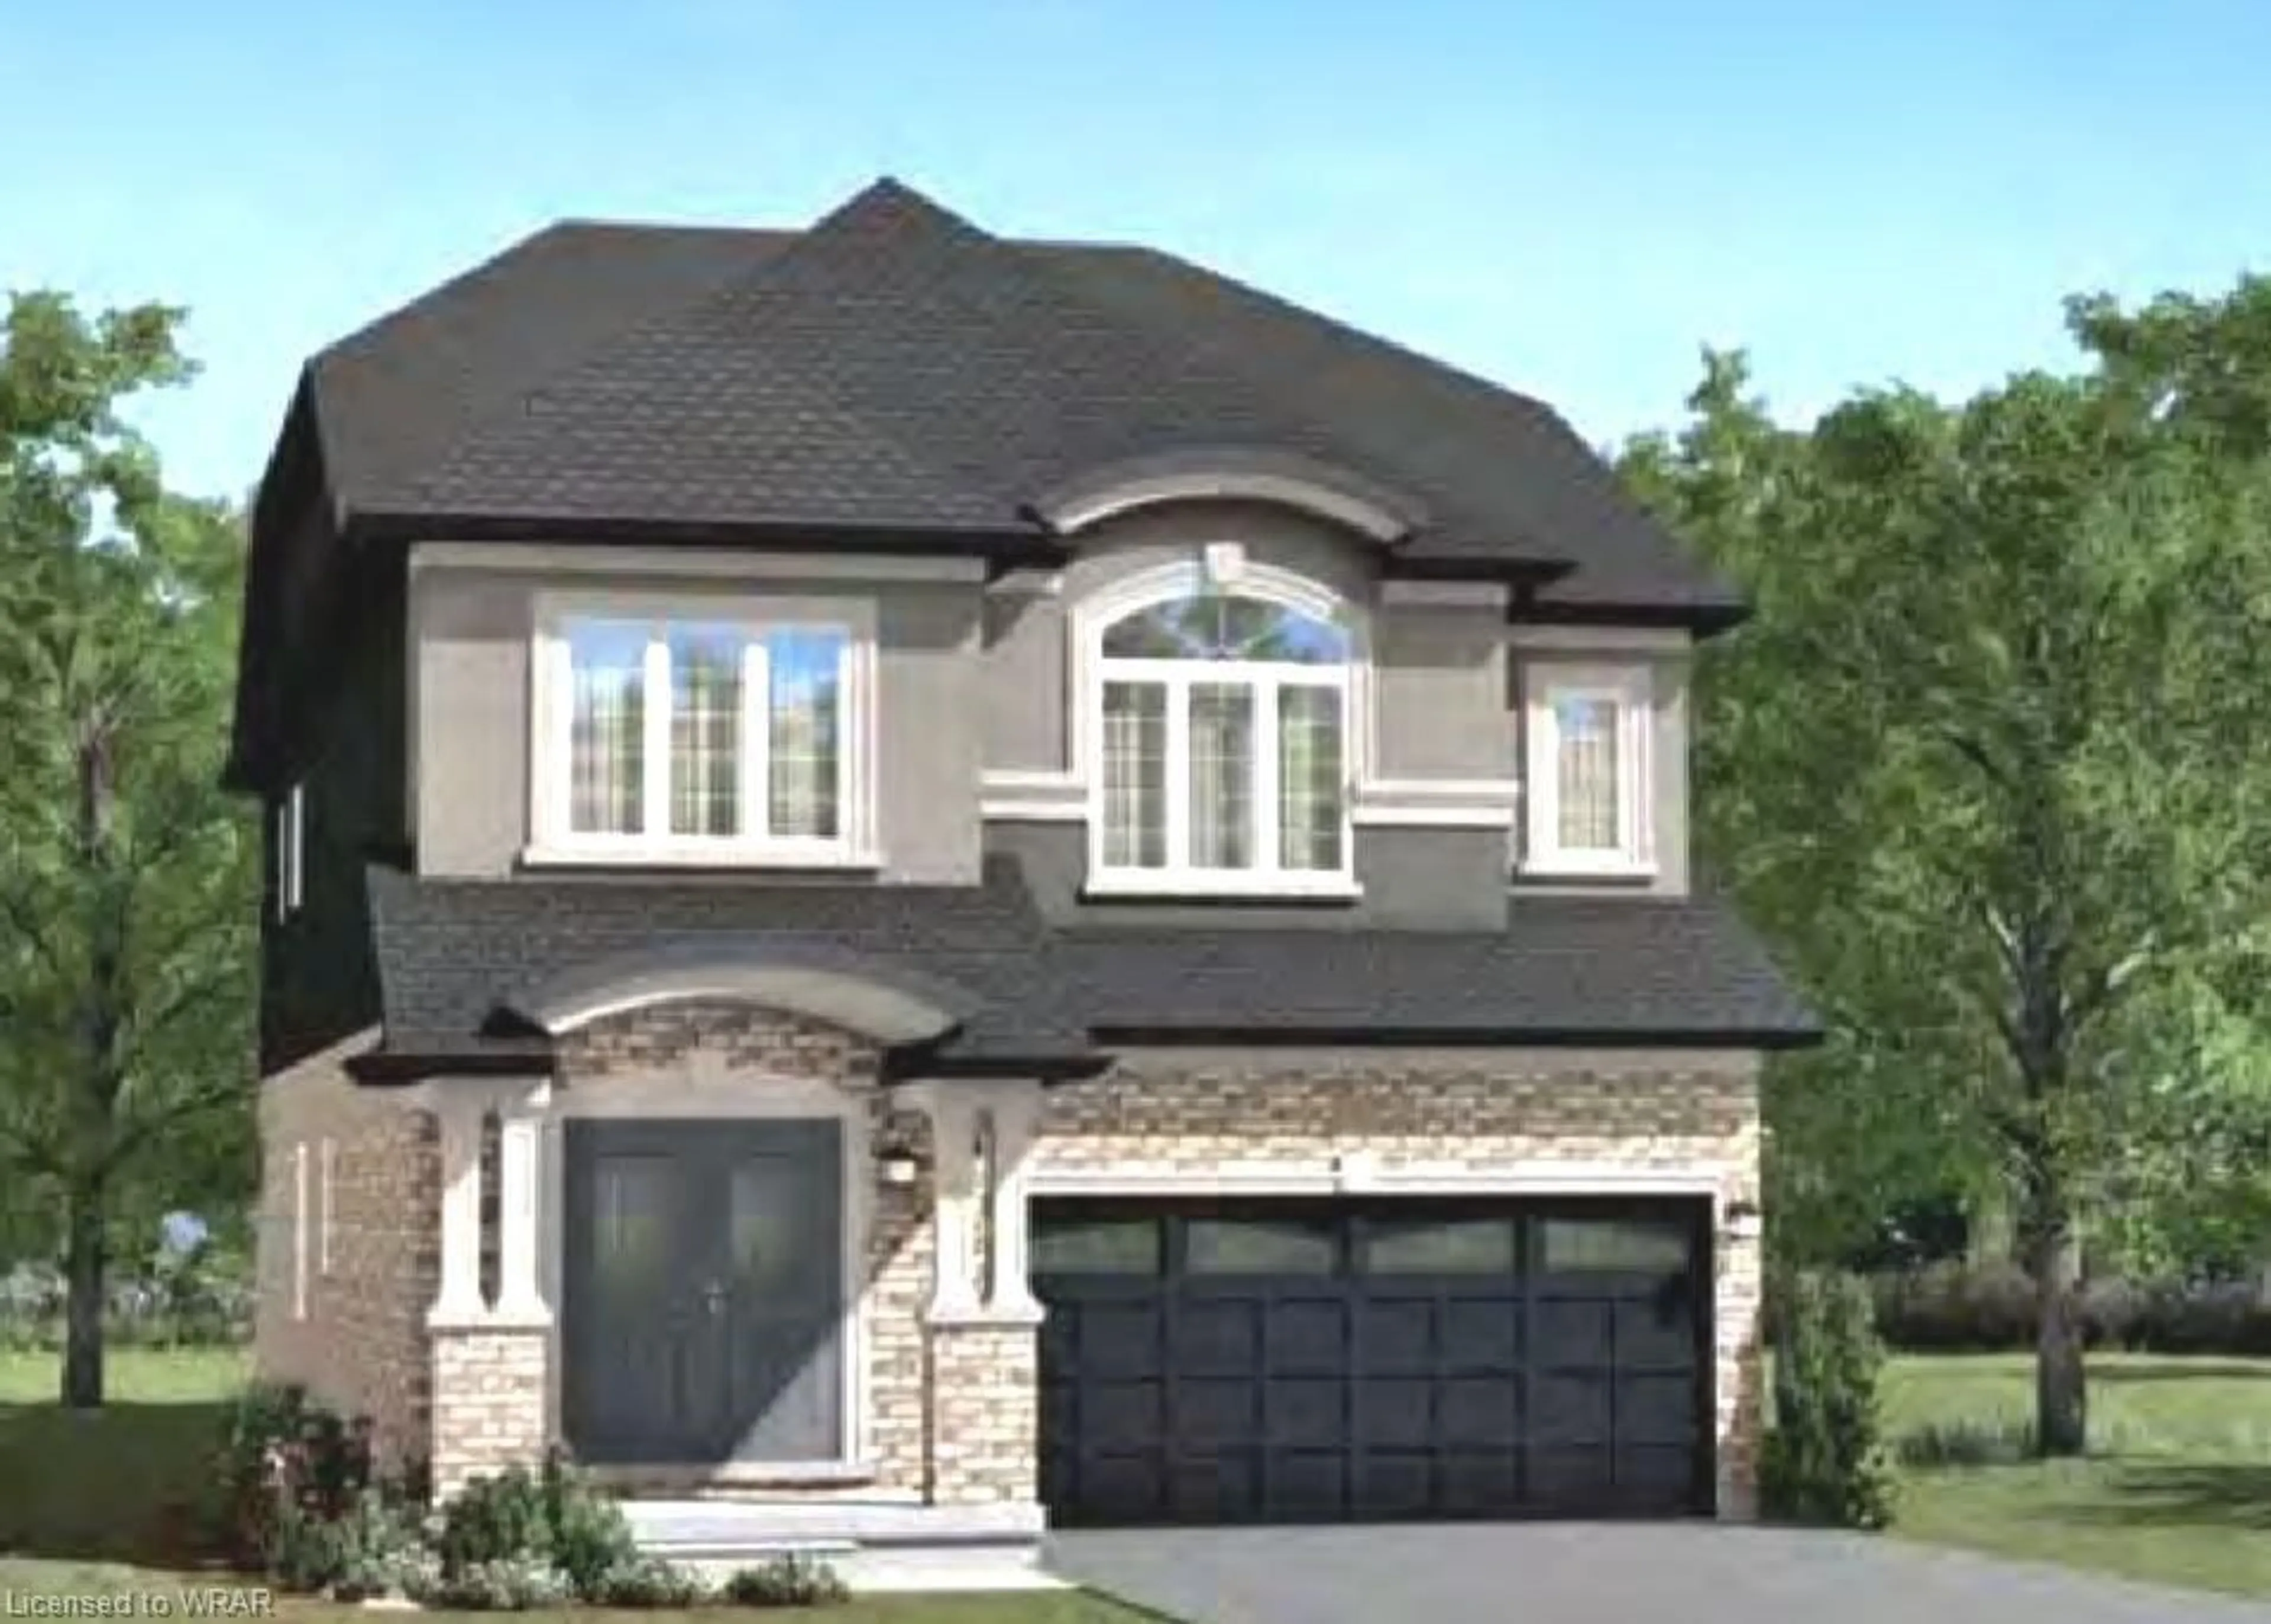 Frontside or backside of a home for LOT 279 Hitchman St, Paris Ontario N3L 3E3